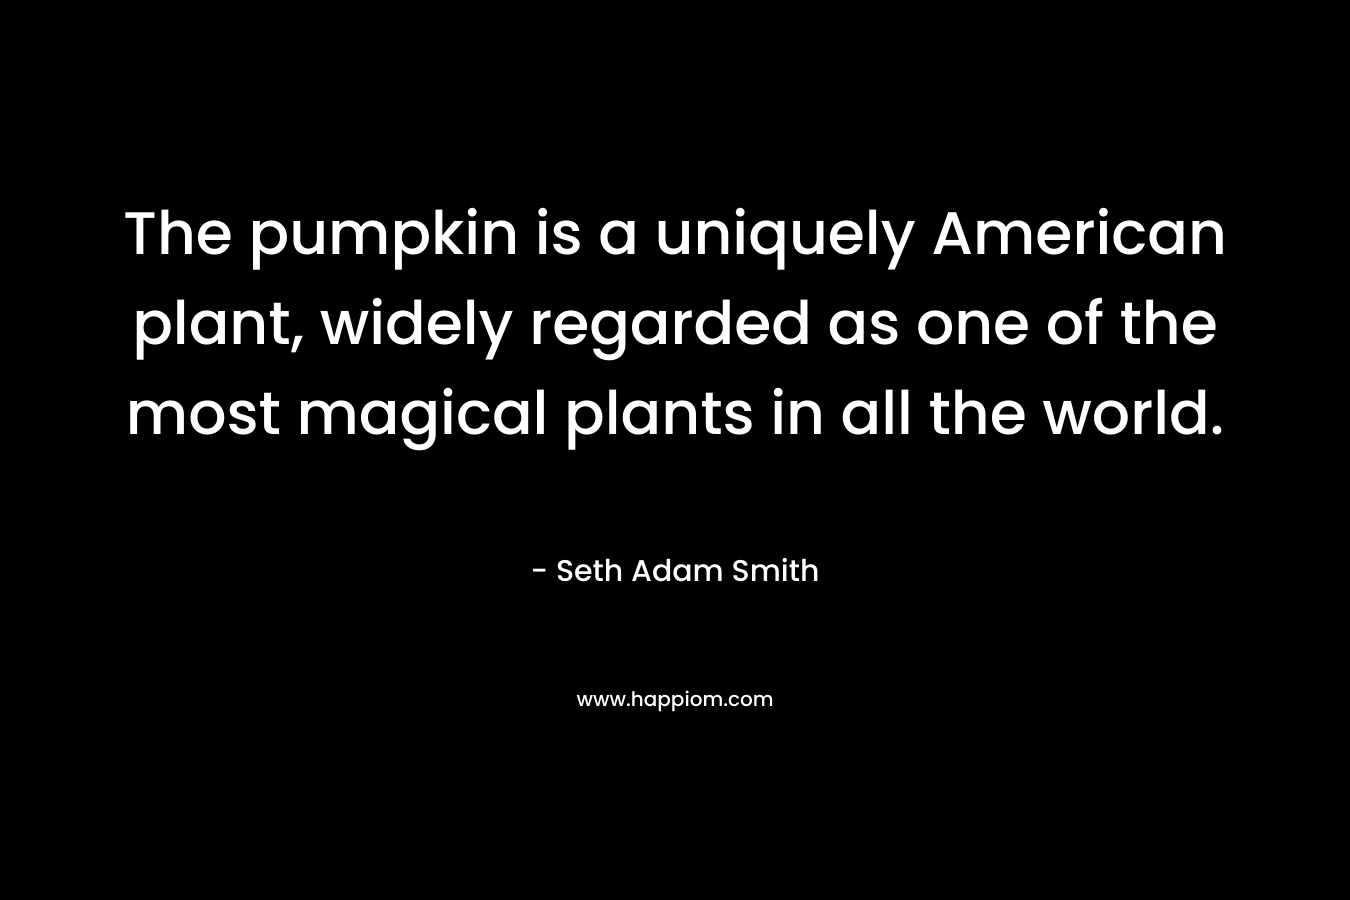 The pumpkin is a uniquely American plant, widely regarded as one of the most magical plants in all the world.